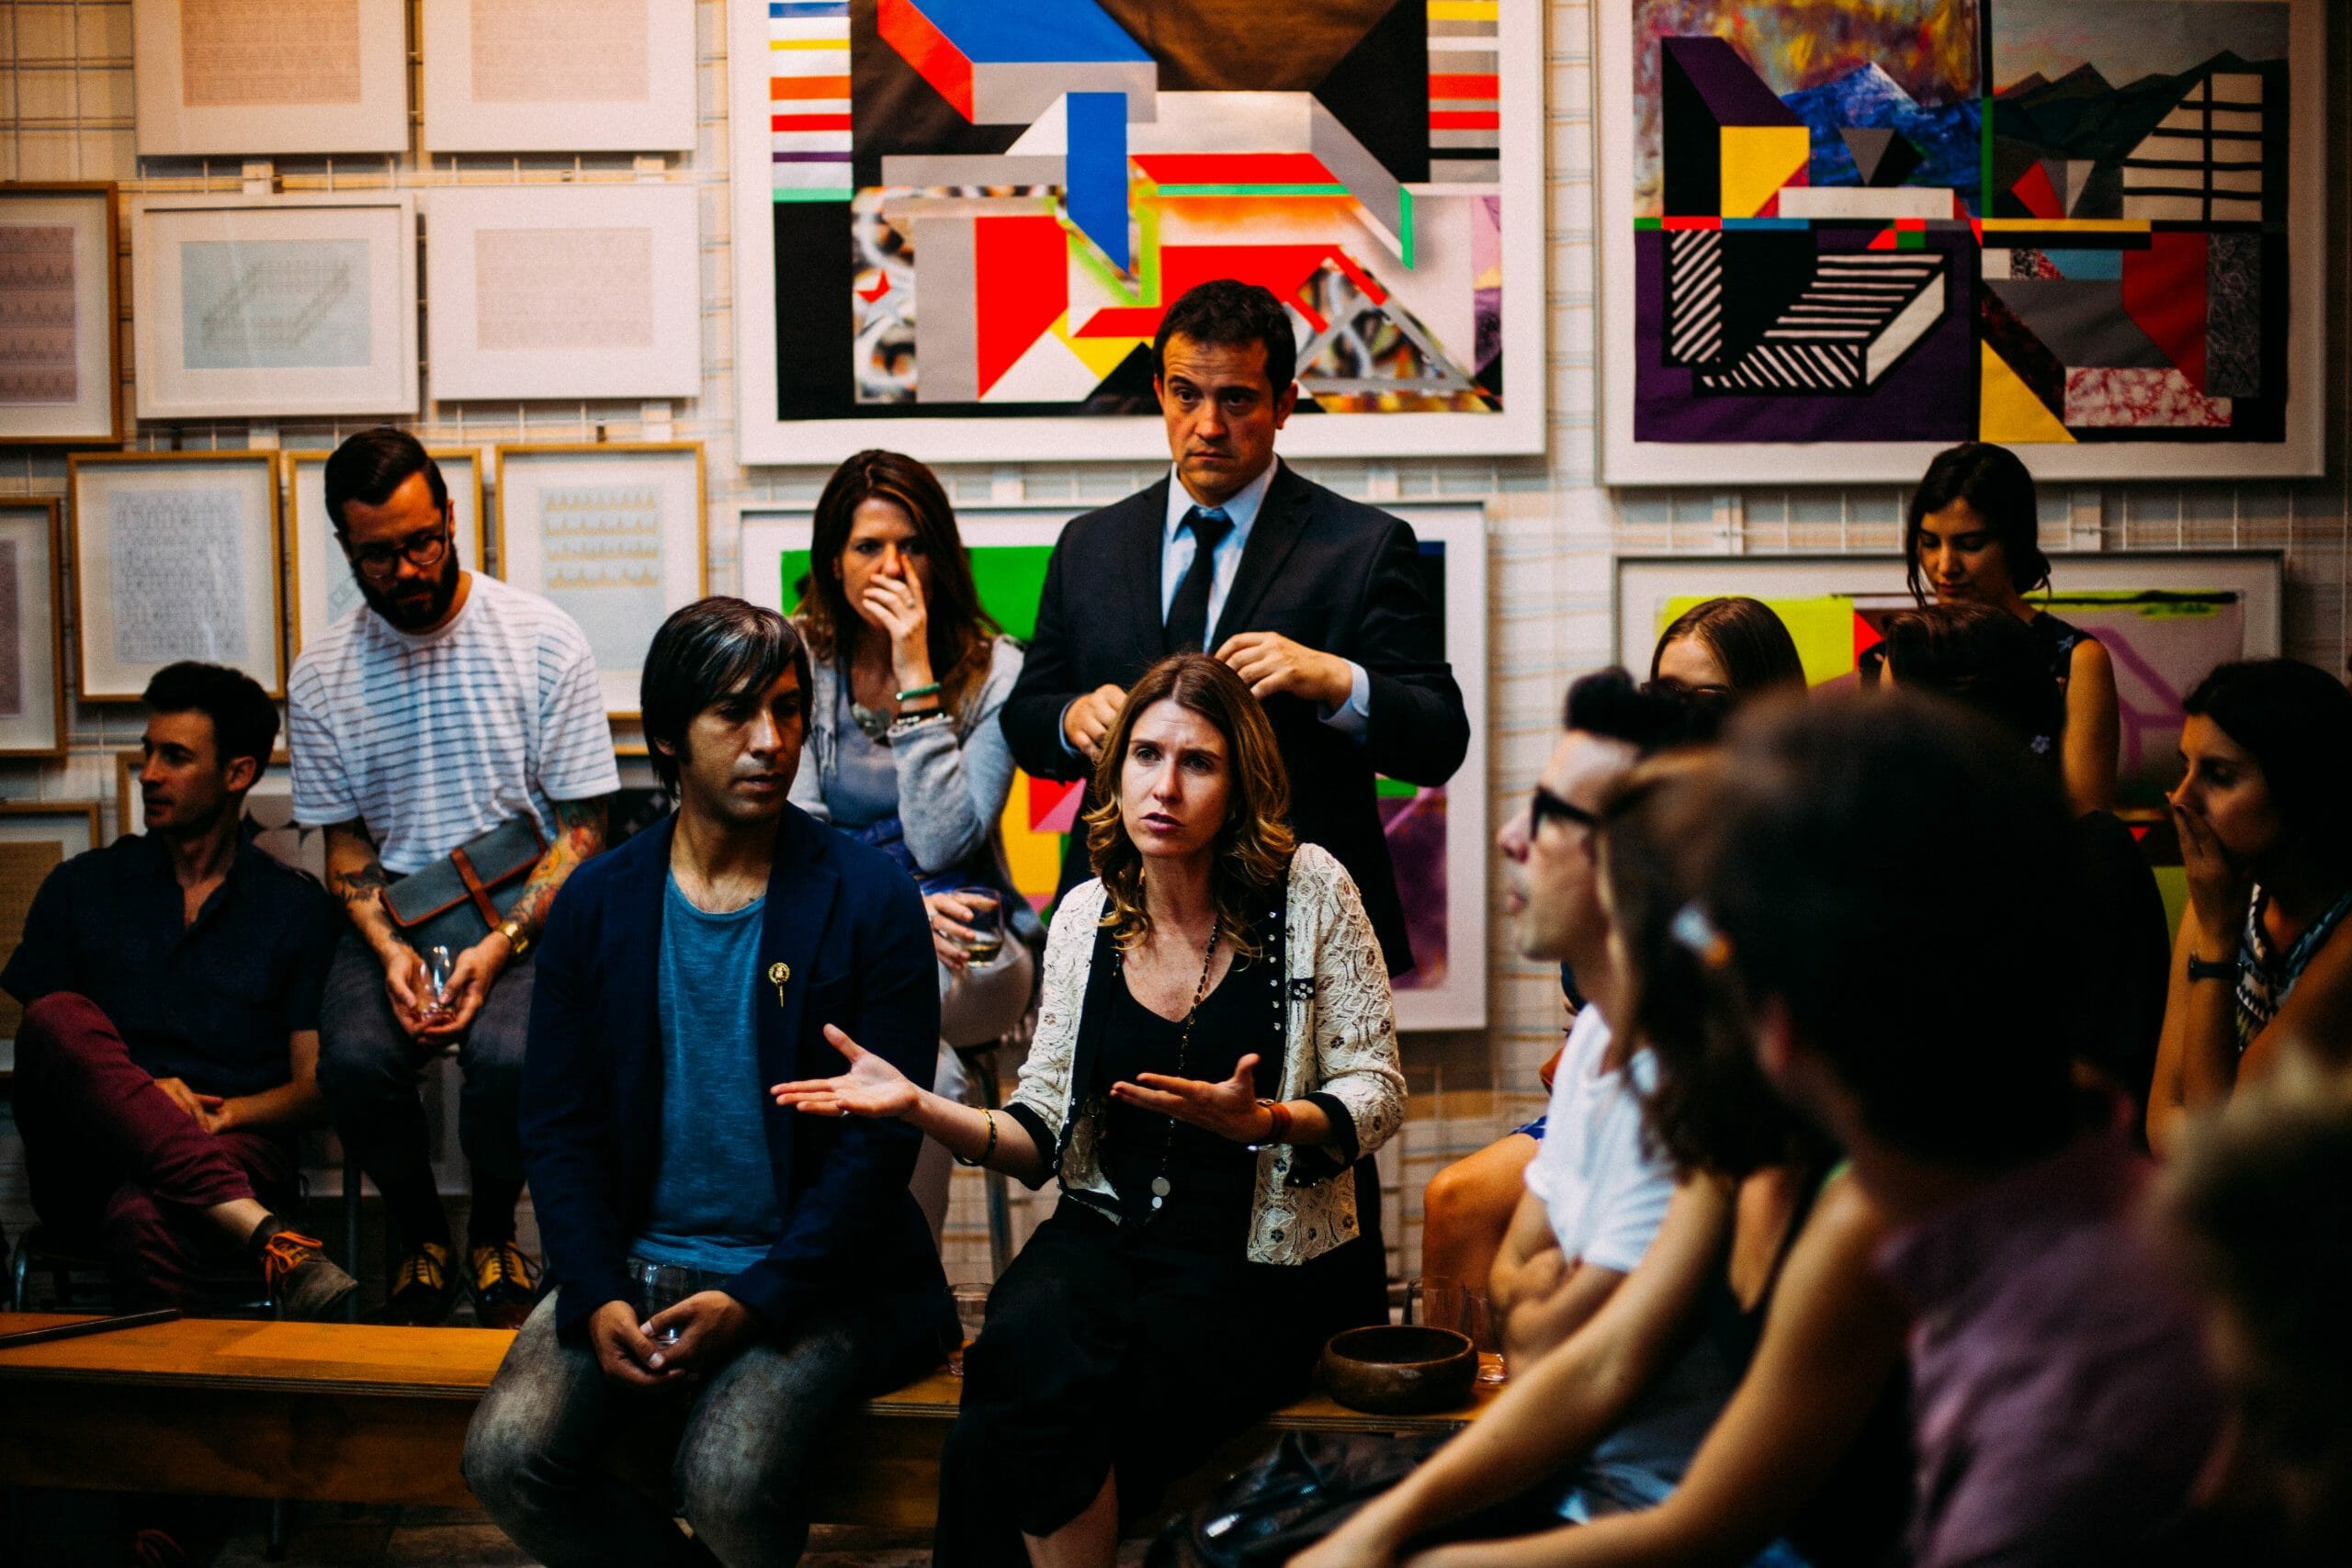 Students talking during a meeting